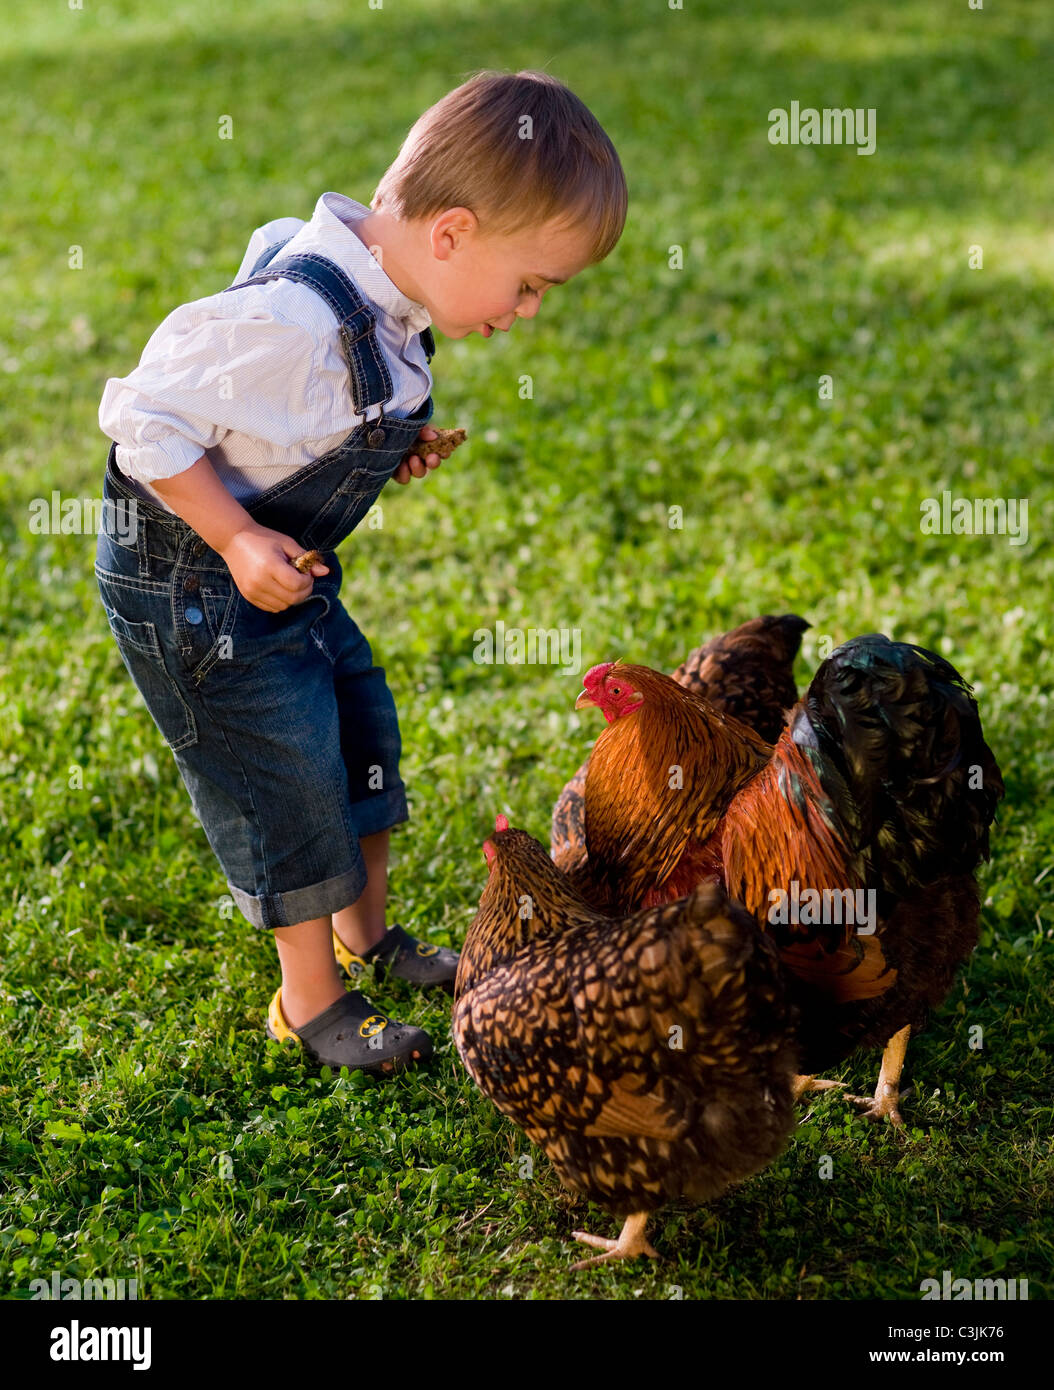 Boy playing with chicken Stock Photo